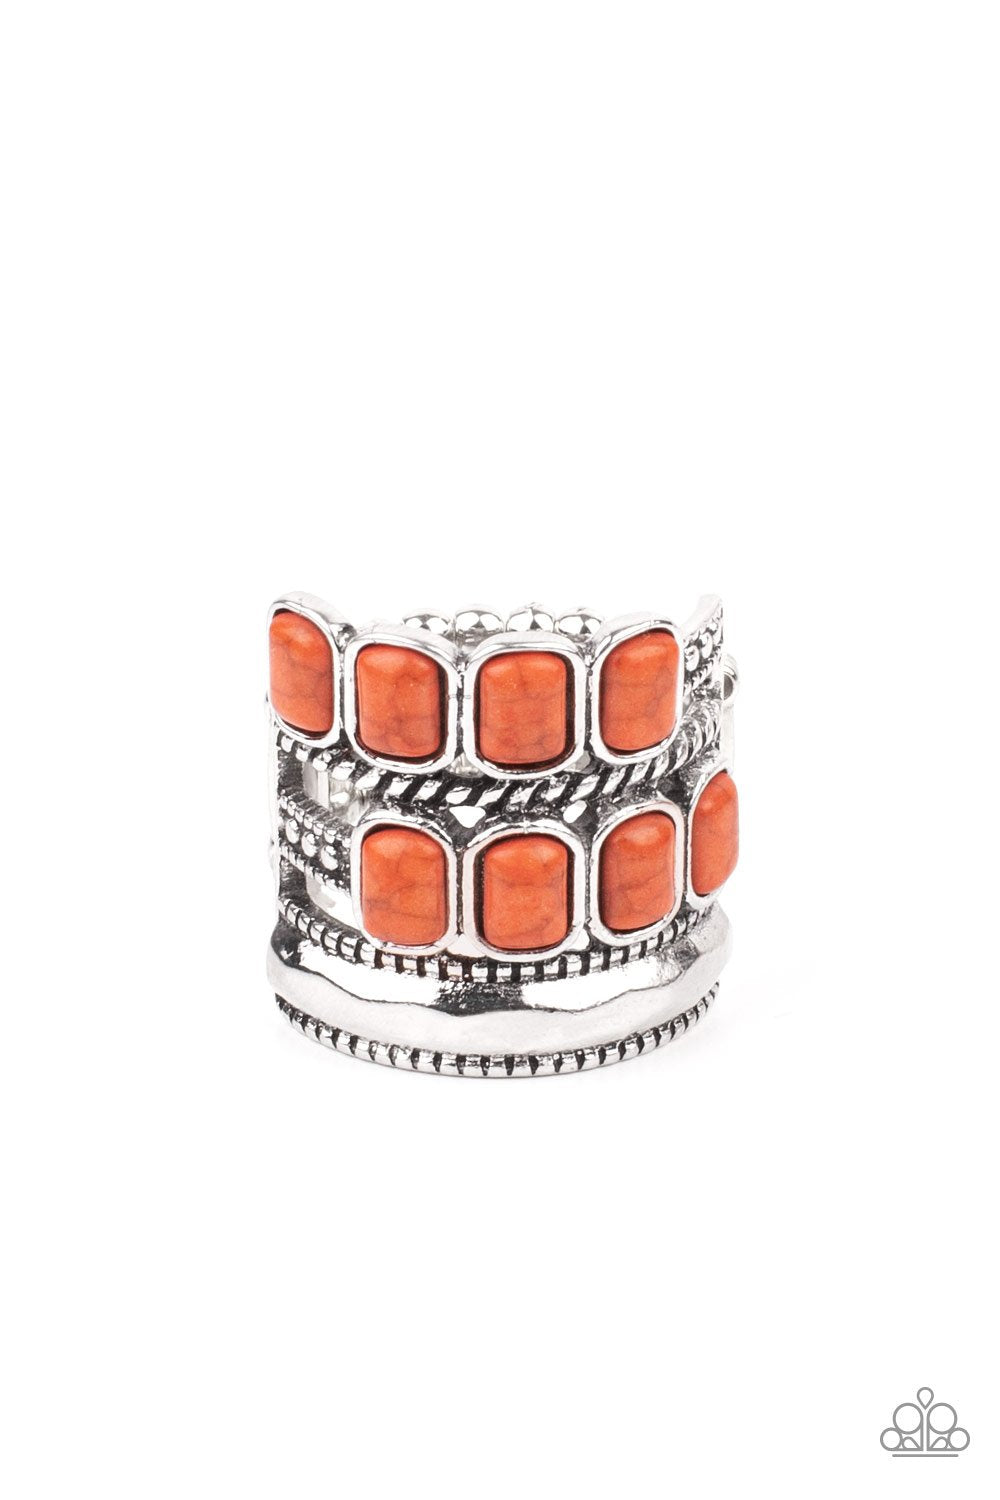 Mojave Monument - Orange Stone Ring - Paparazzi Accessories - Bejeweled Accessories By Kristie